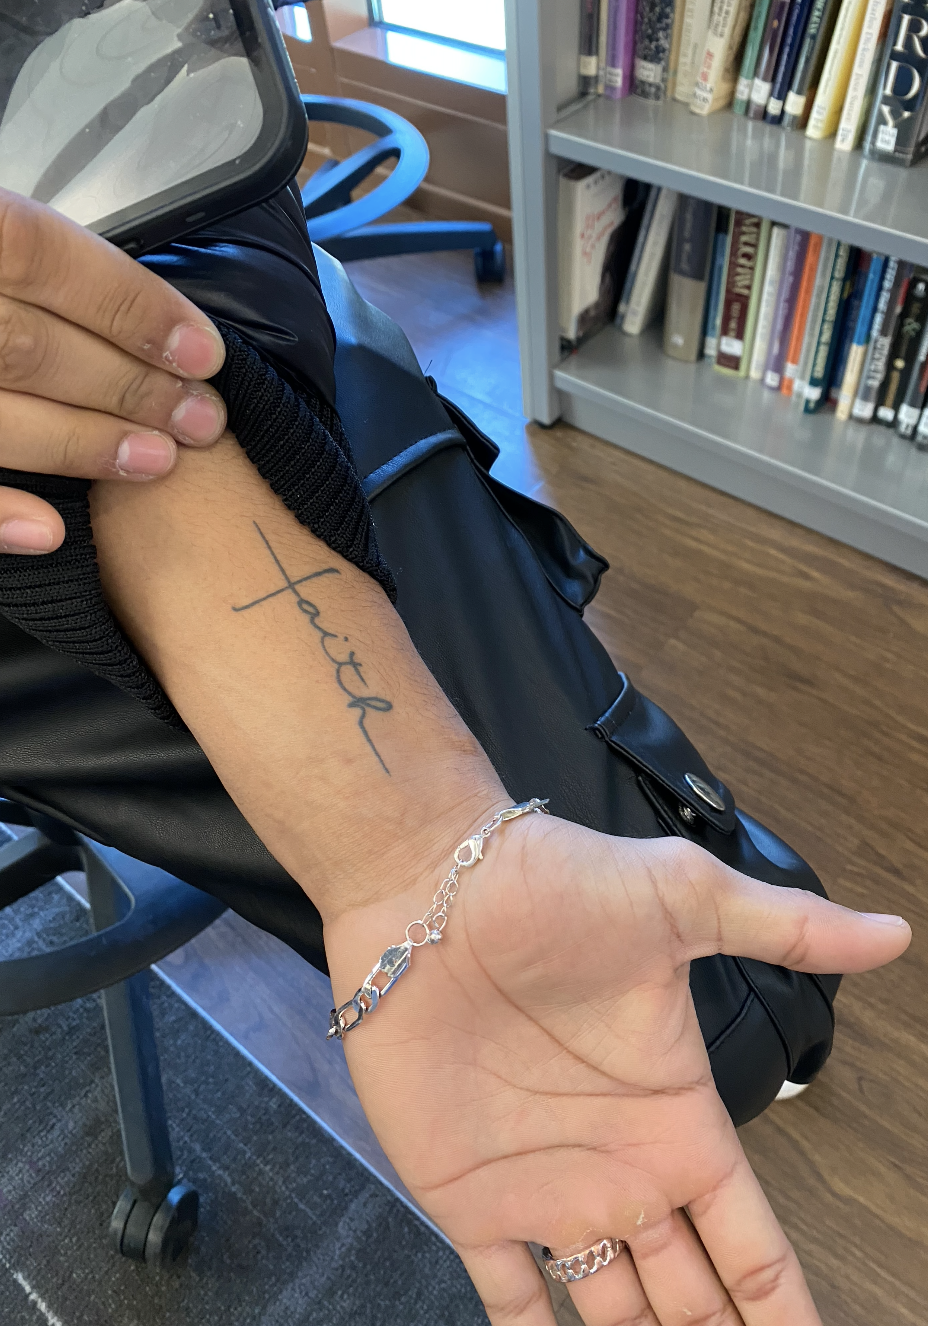 Tatted teachers and students: combatting tattoo stigma with self-expression  – Raven Report